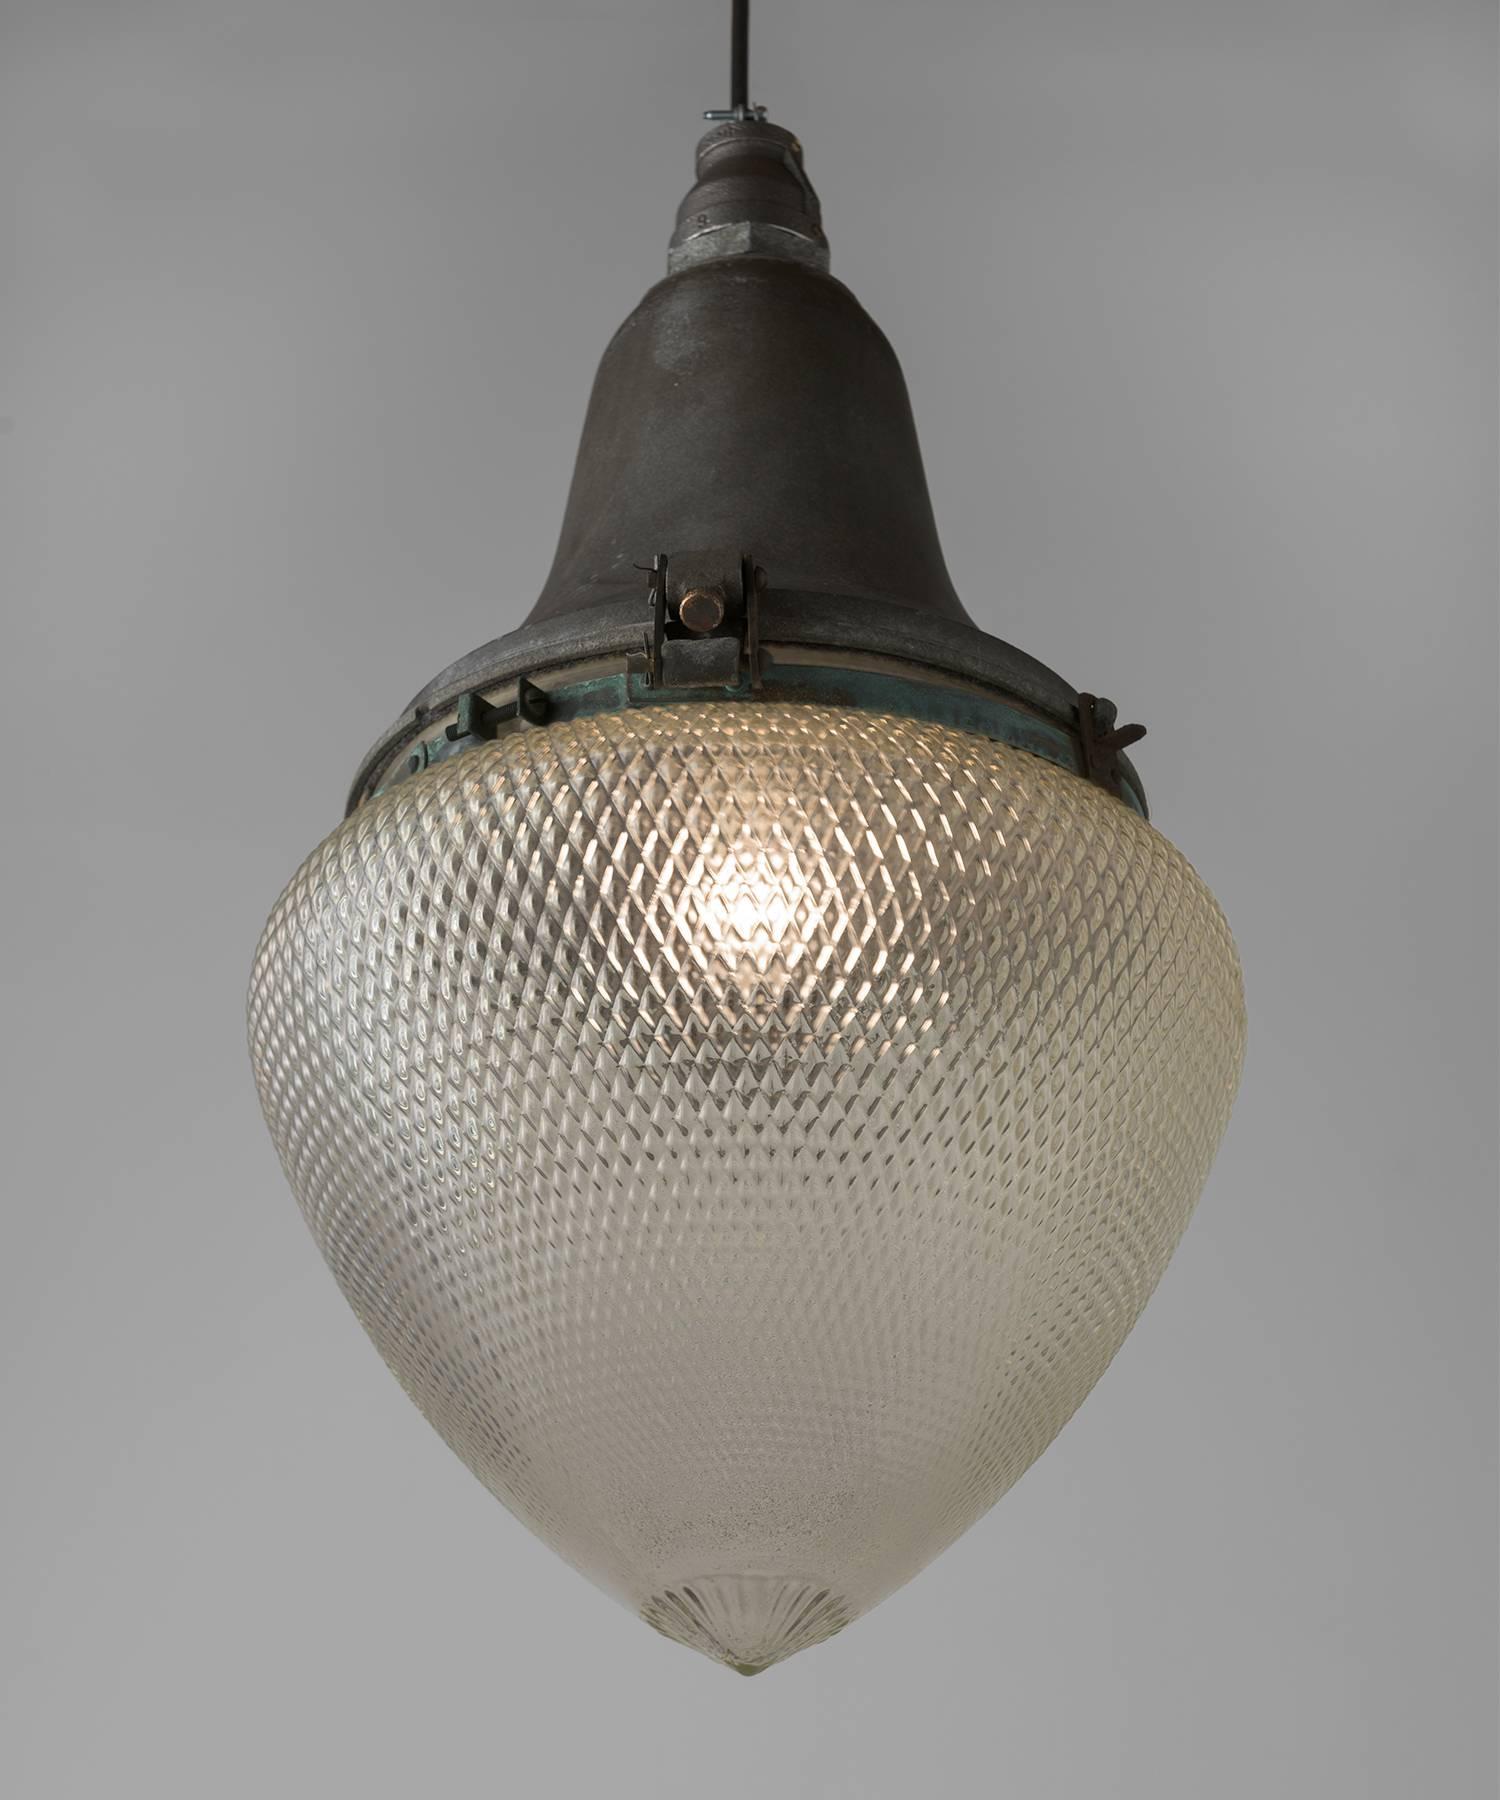 American Industrial Aluminum and Glass Street Lamps, circa 1930